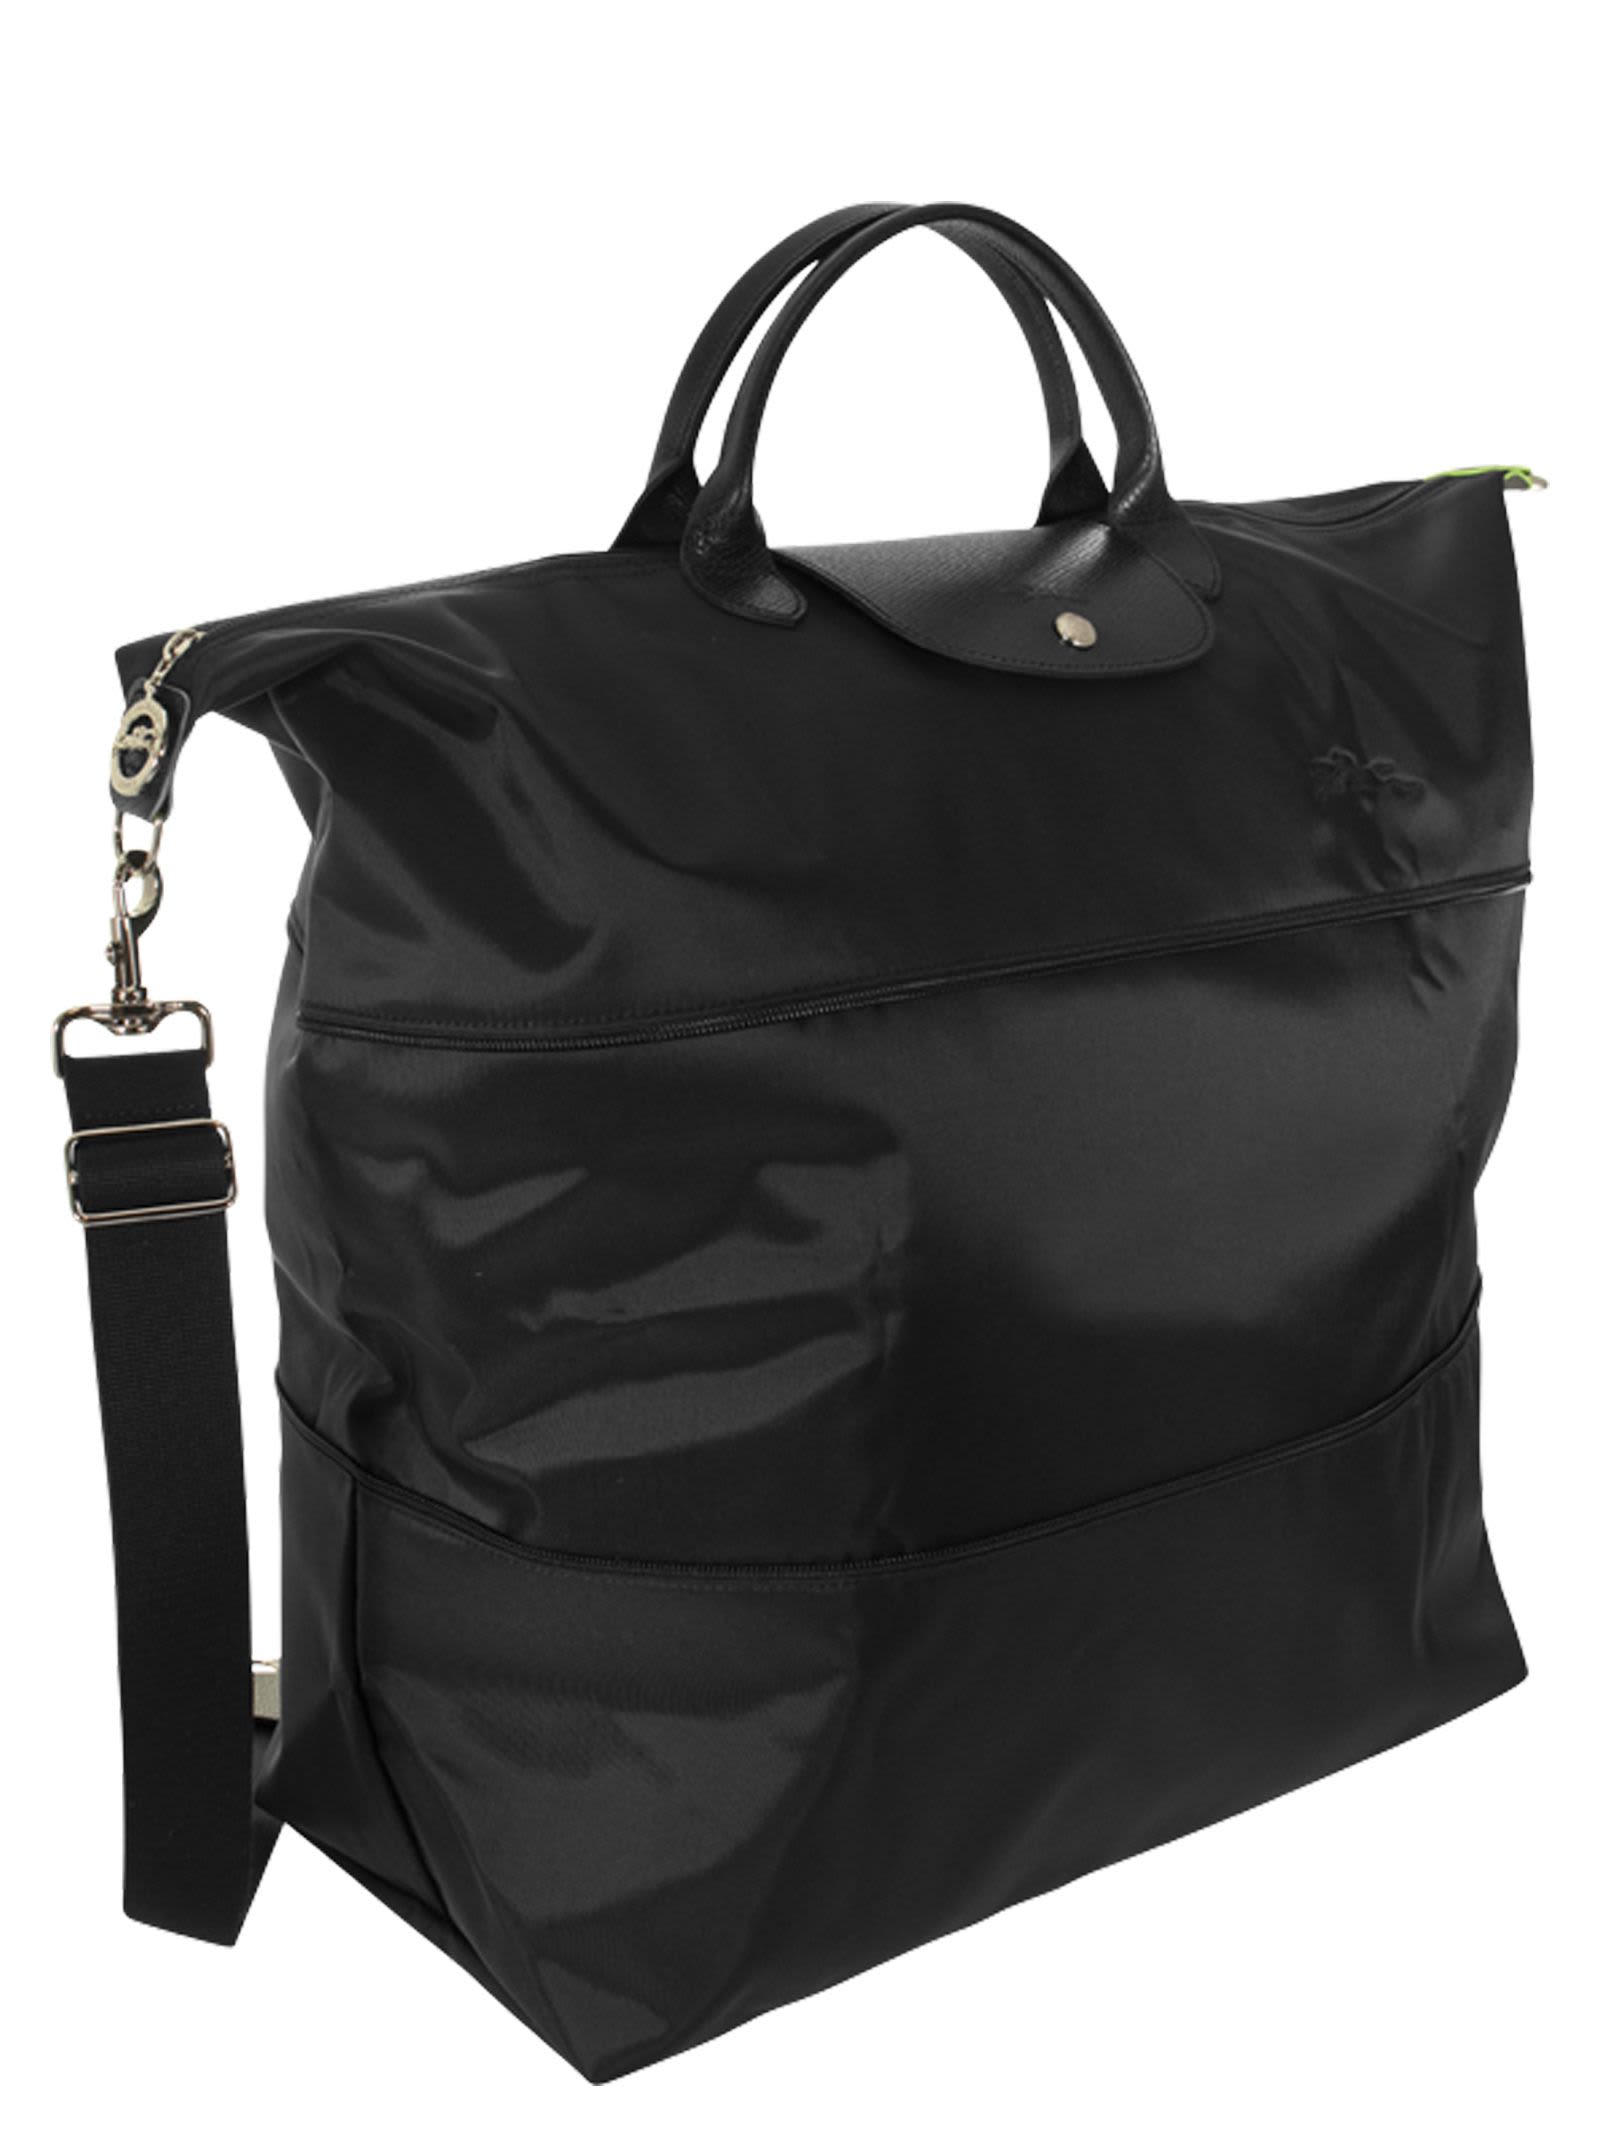 Le Pliage Green Travel bag expandable Black - Recycled canvas (L1911919001)